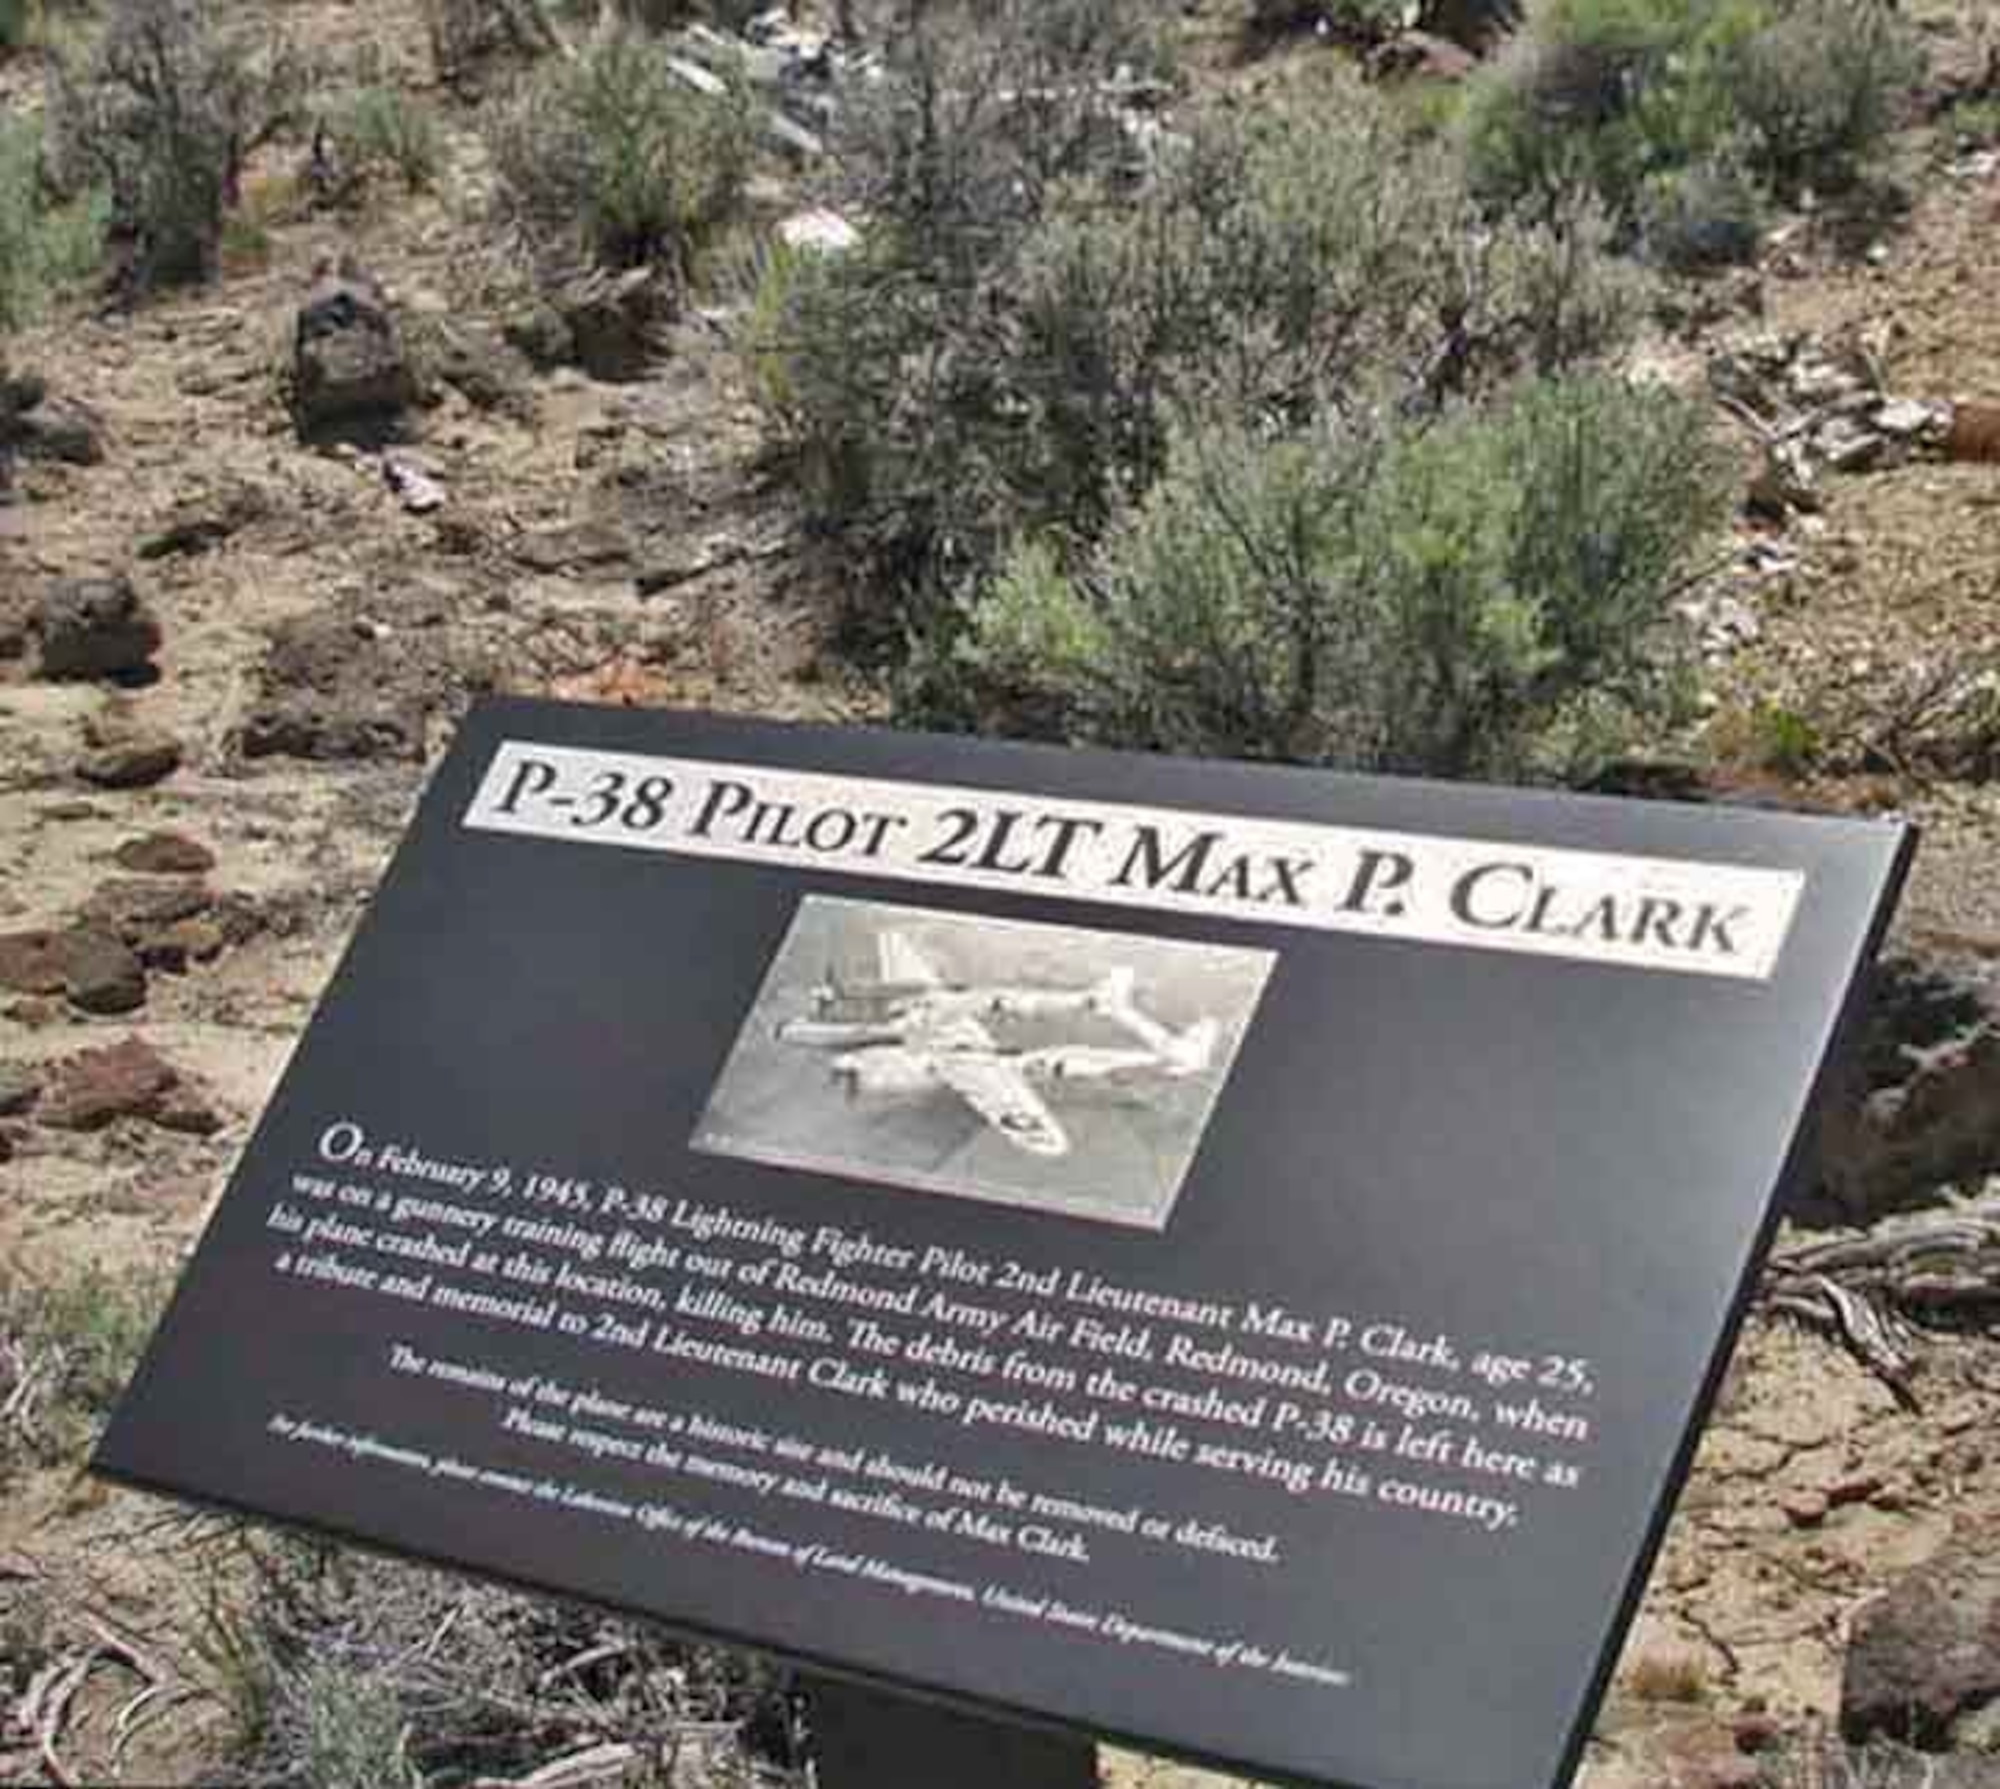 Memorial Plaque at crash site of 2nd Lt. Max P. Clark, U.S. Army Air Corps, a P-38 Lightning student pilot lost during a gunnery training mission flown from Redmond Army Air Base in February 1945.  (Courtesy Ginger Sanders, Photograph Oregon Web Log)